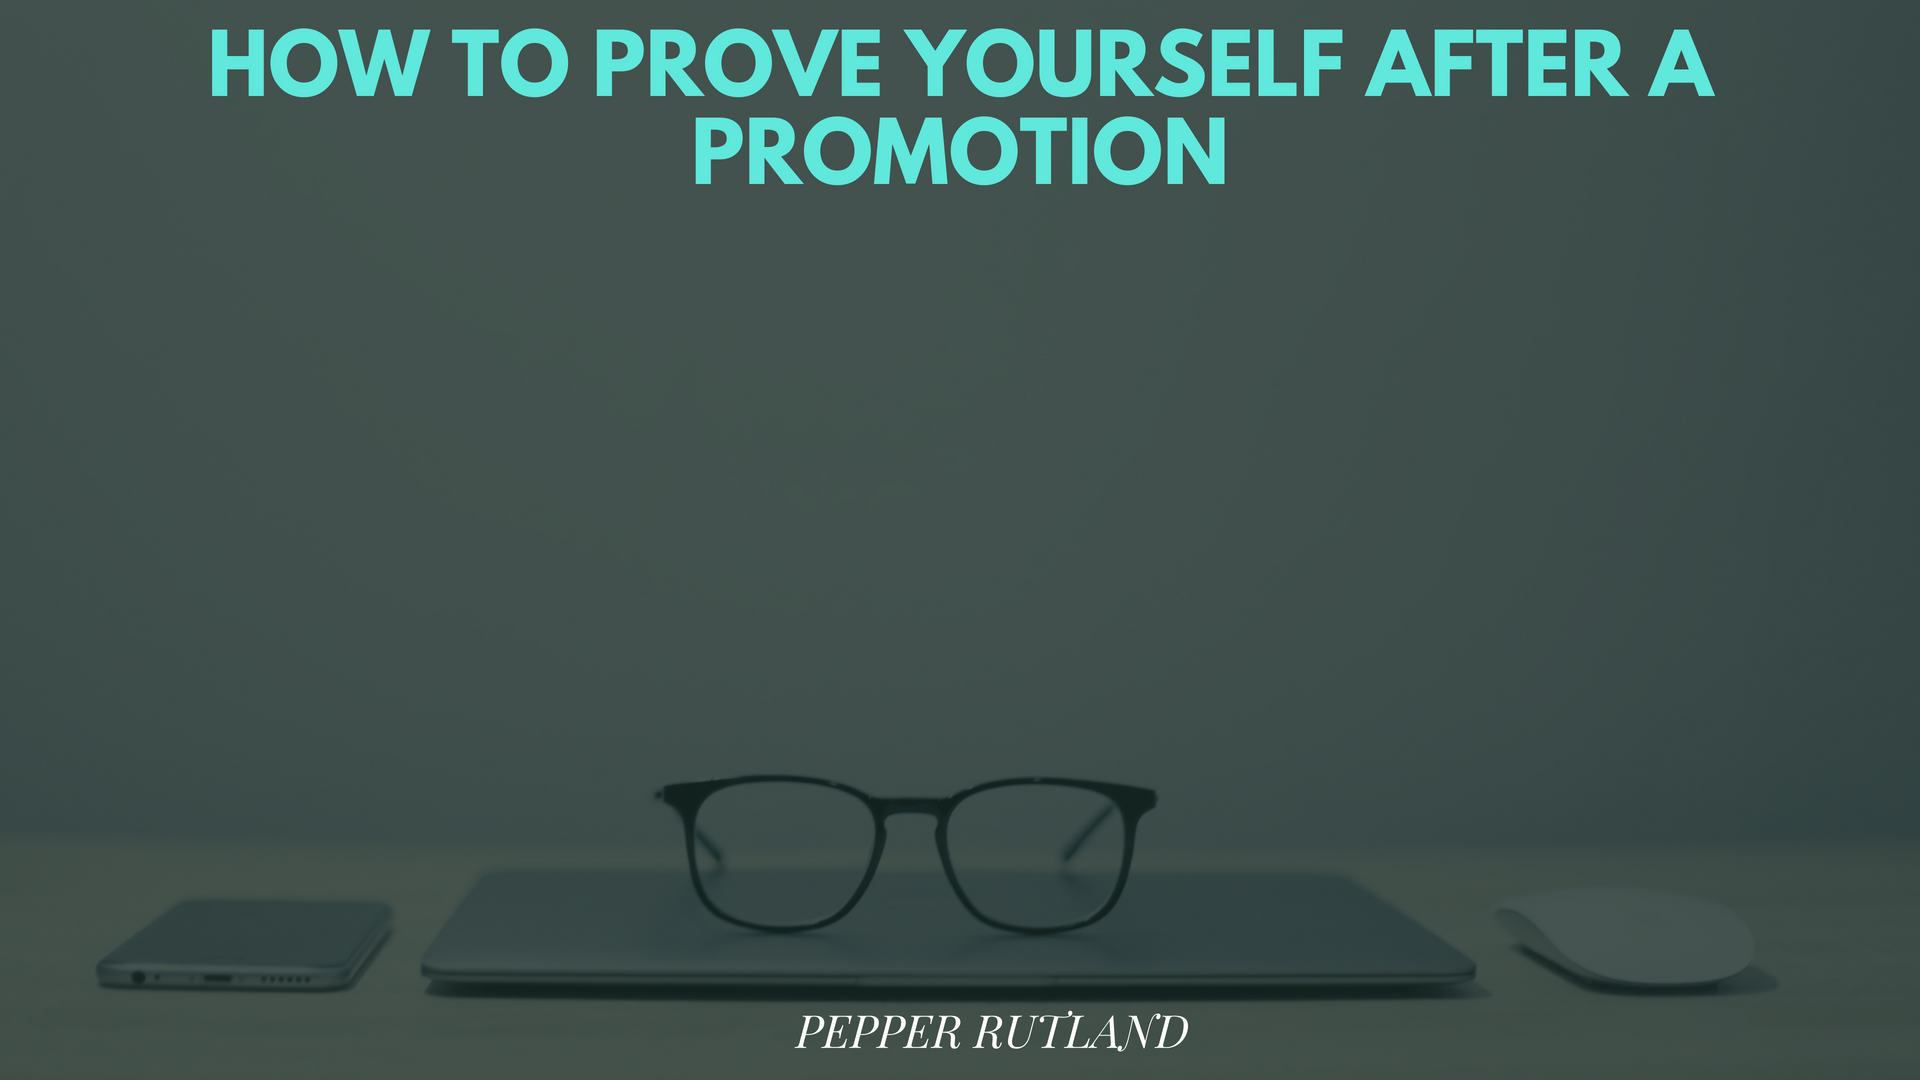 How to Prove Yourself after a Promotion